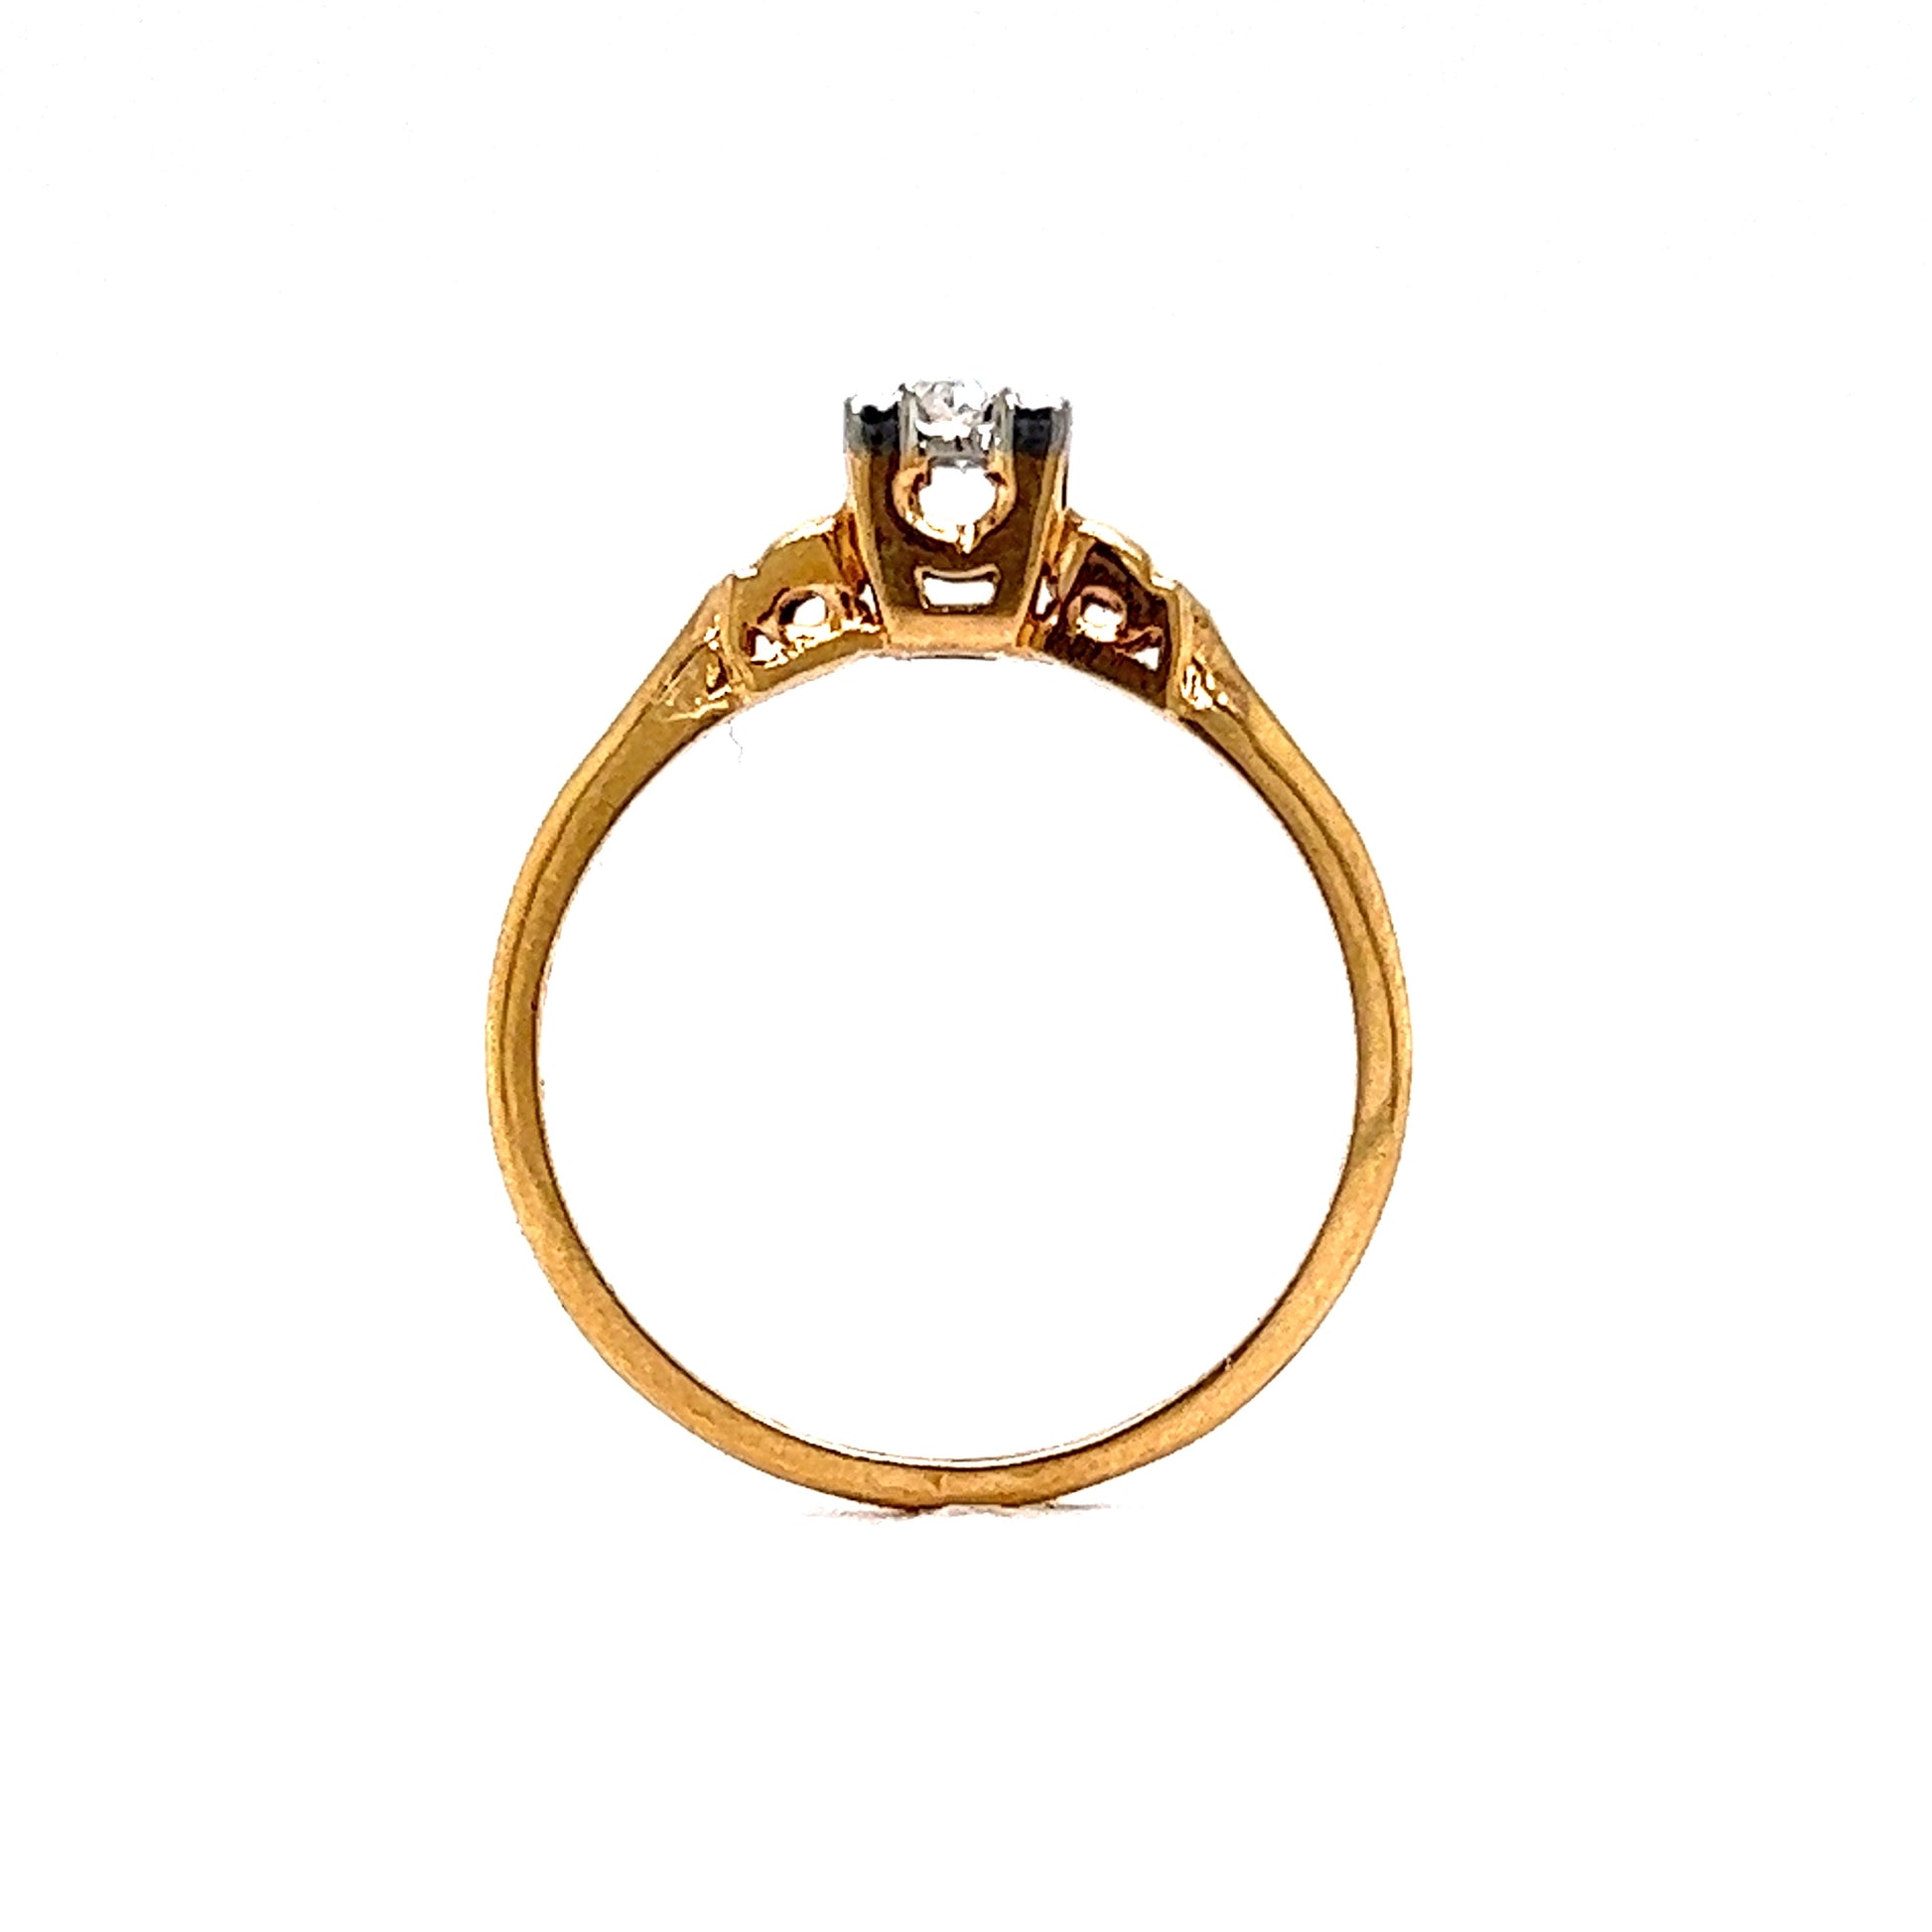 .07 Transitional Solitaire Engagement Ring in 14k Yellow & White GoldComposition: 14 Karat Yellow Gold/14 Karat White Gold Ring Size: 6.25 Total Diamond Weight: .07ct Total Gram Weight: 1.7 g Inscription: 14k
      